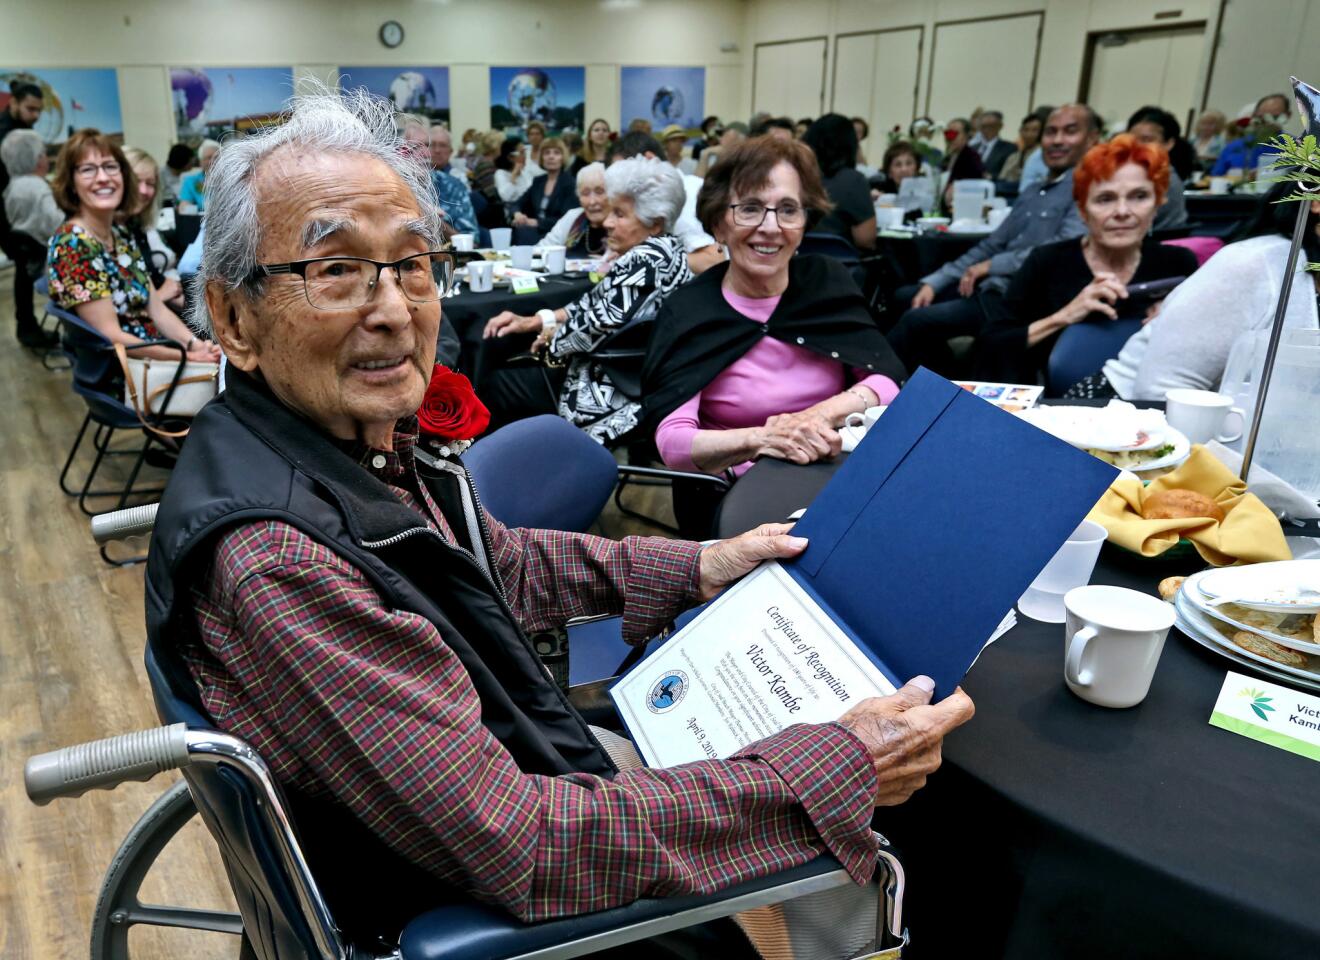 The non-profit Golden Age Foundation hosted a centenarian luncheon to celebrate and honor 24 people who are/will be 100 years old and older, like Victor Kambe, at Leisure World in Seal Beach on Tuesday, April 9, 2019. Mr. Kambe will turn 100 on April 21st.